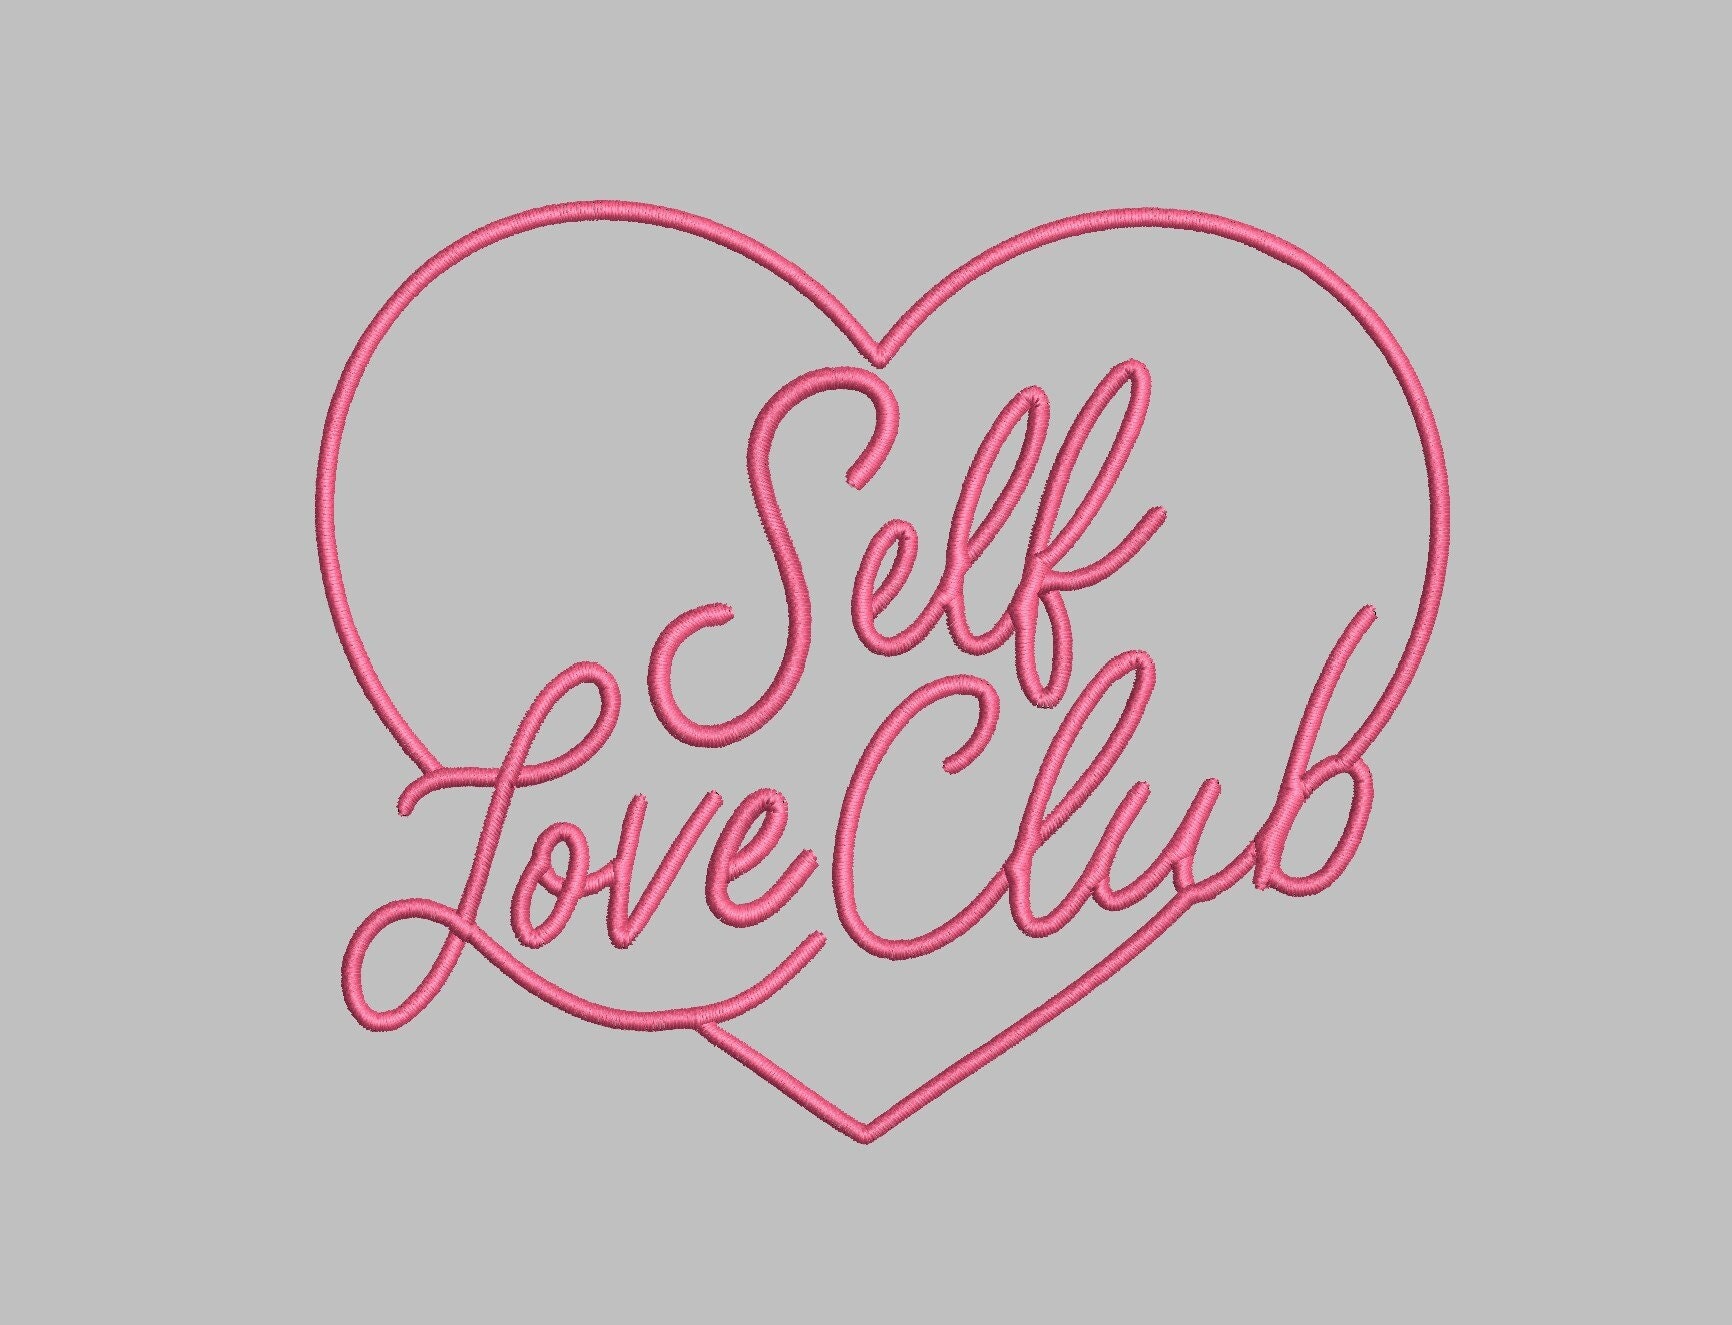 Aesthetic Self Love Club Heart Embroidery Design PES and DST - Etsy